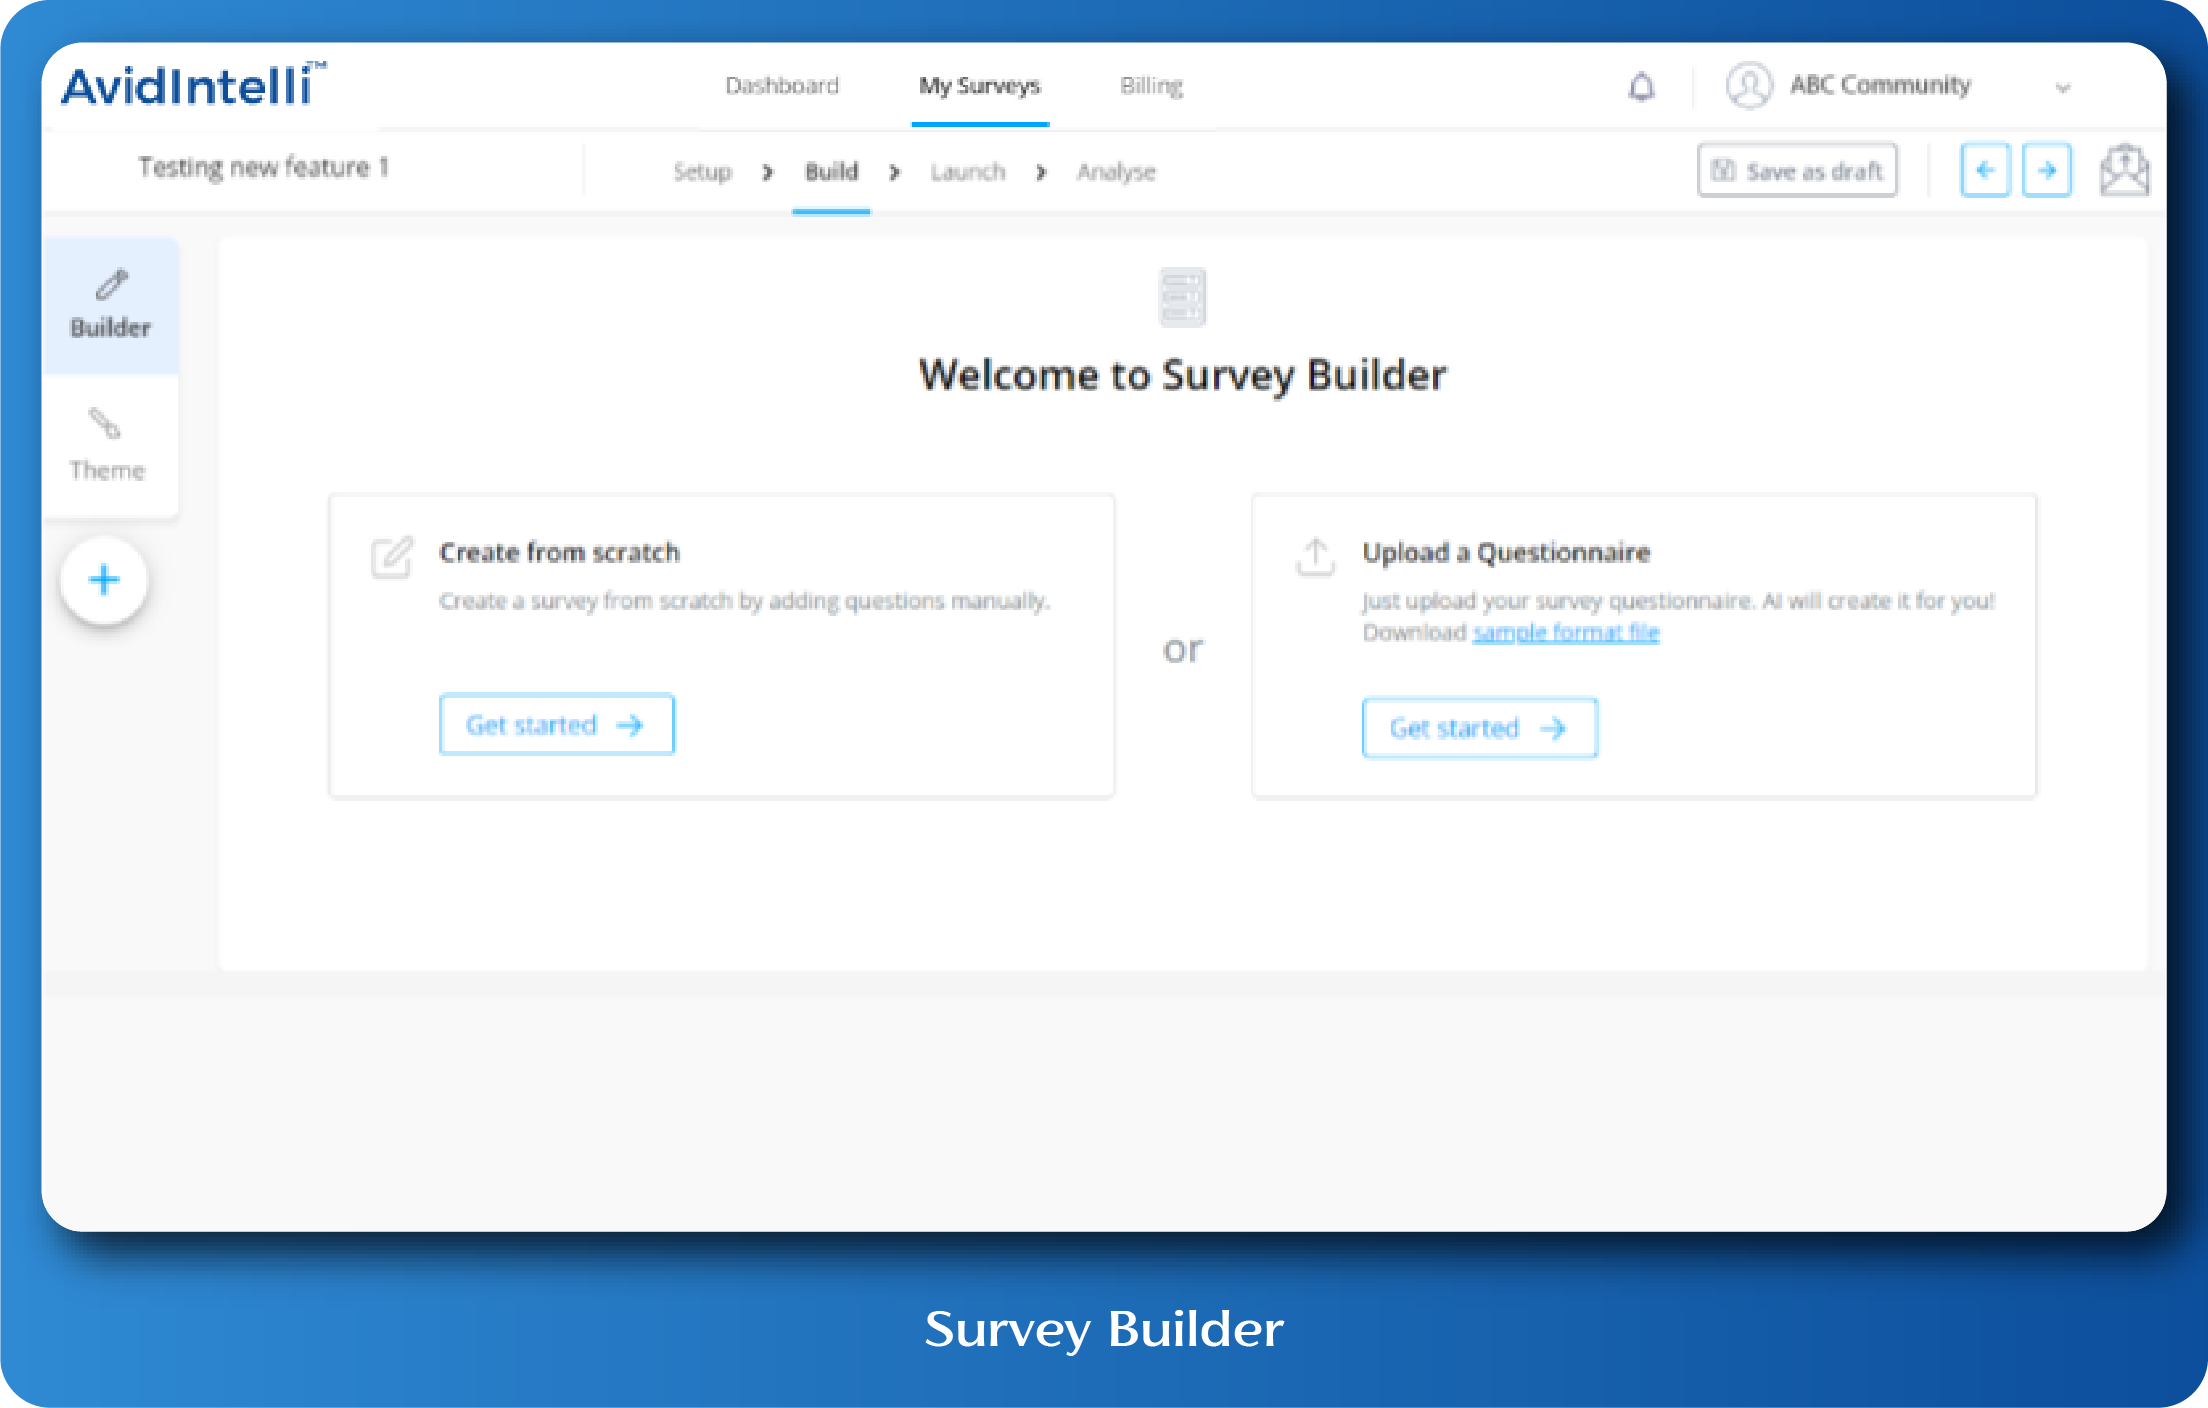 Build surveys from scratch or upload a questionnaire and let AvidIntelli handle the rest